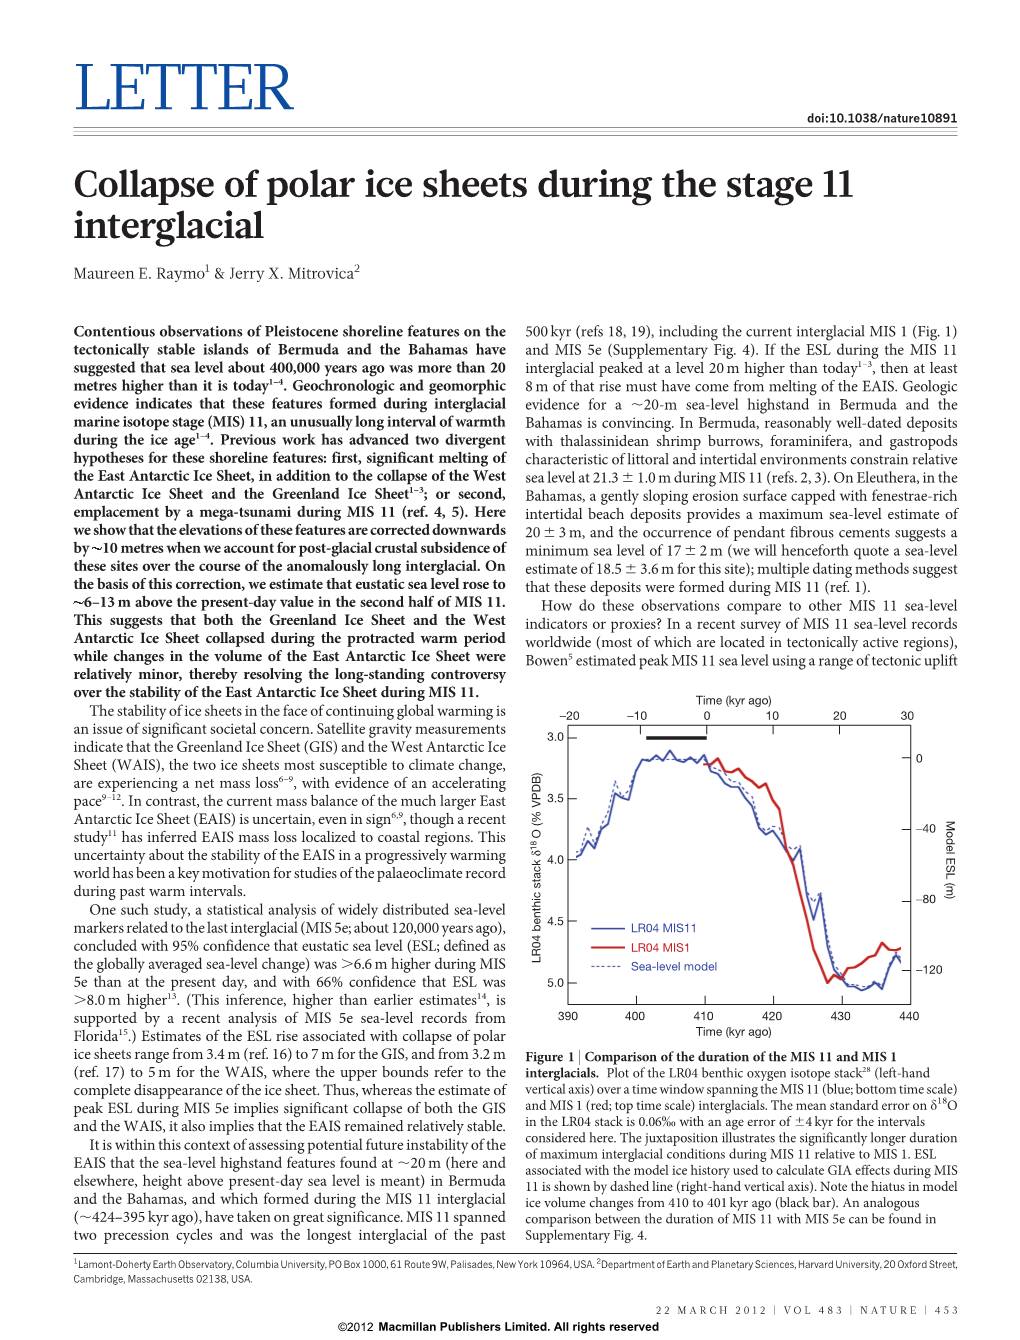 Collapse of Polar Ice Sheets During the Stage 11 Interglacial